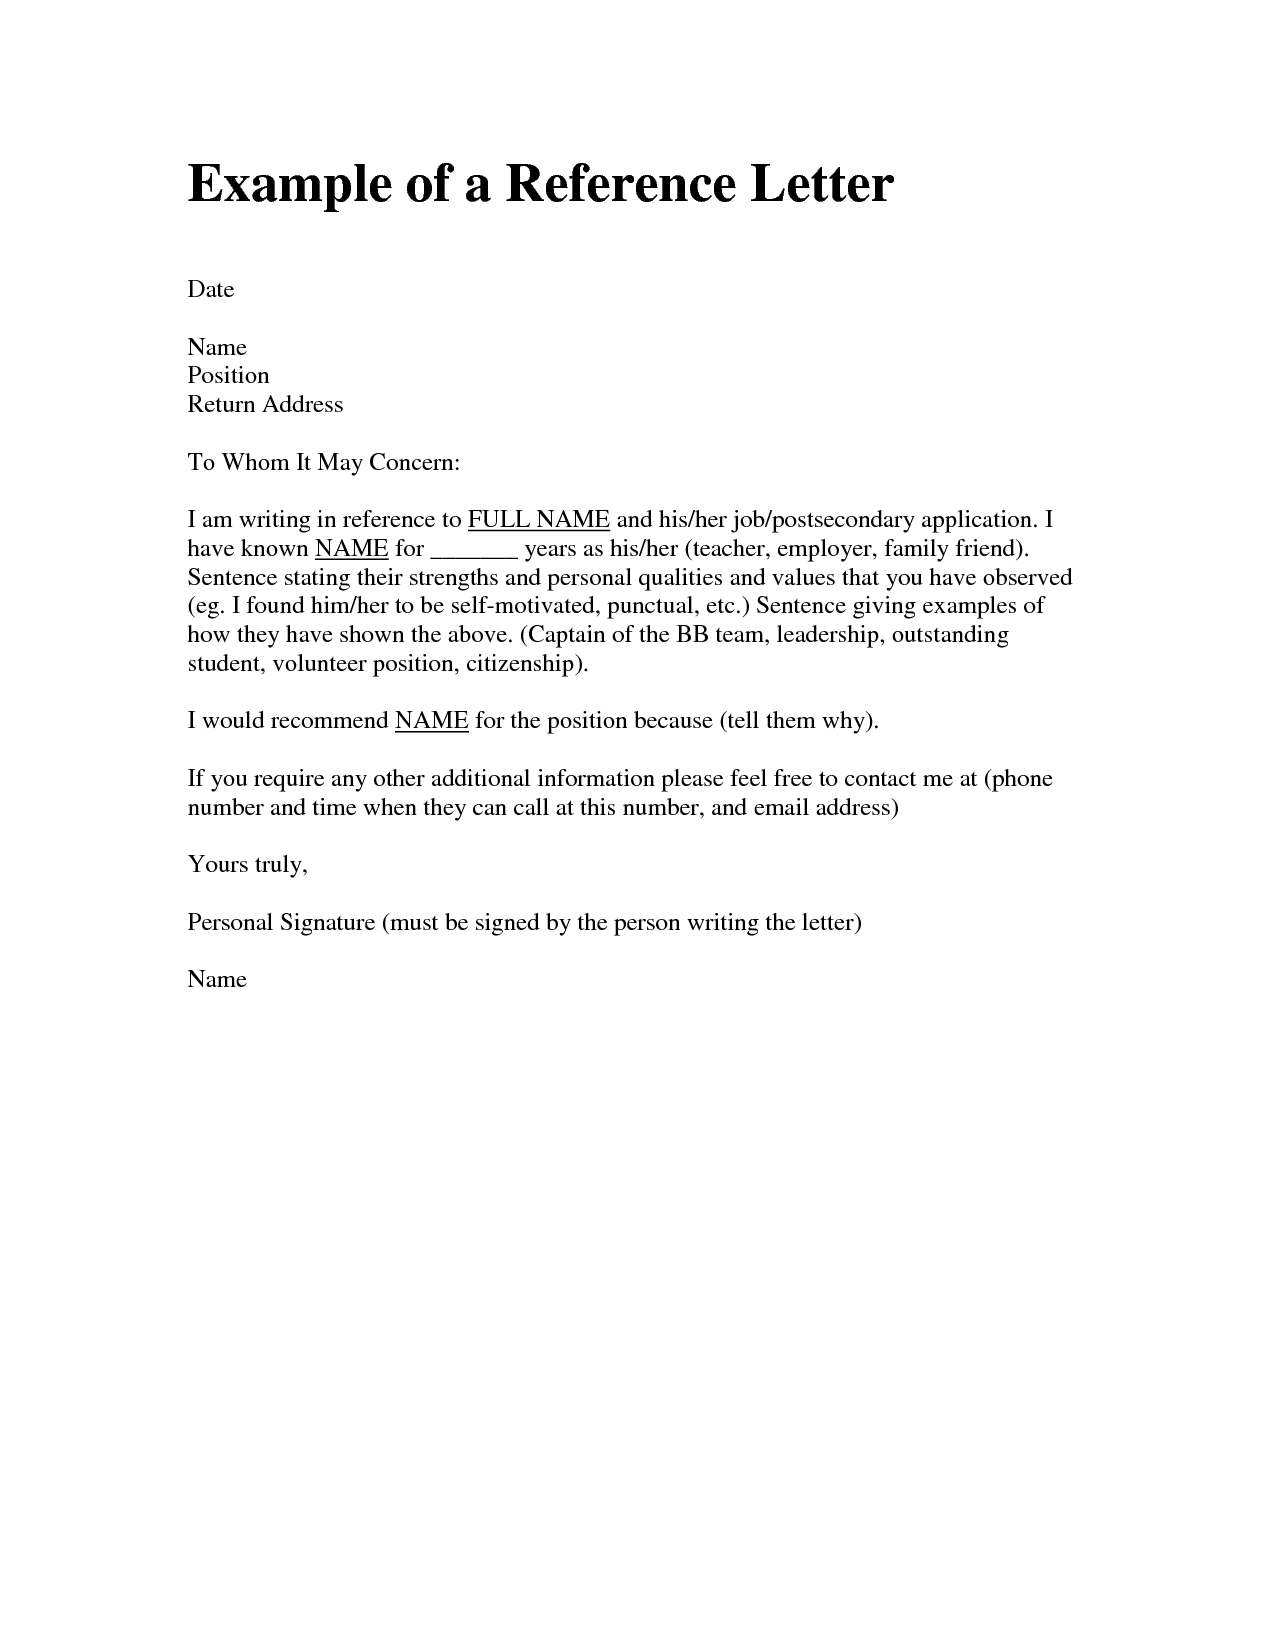 Personal Letter Of Recommendation For A Friend Example intended for size 1275 X 1650